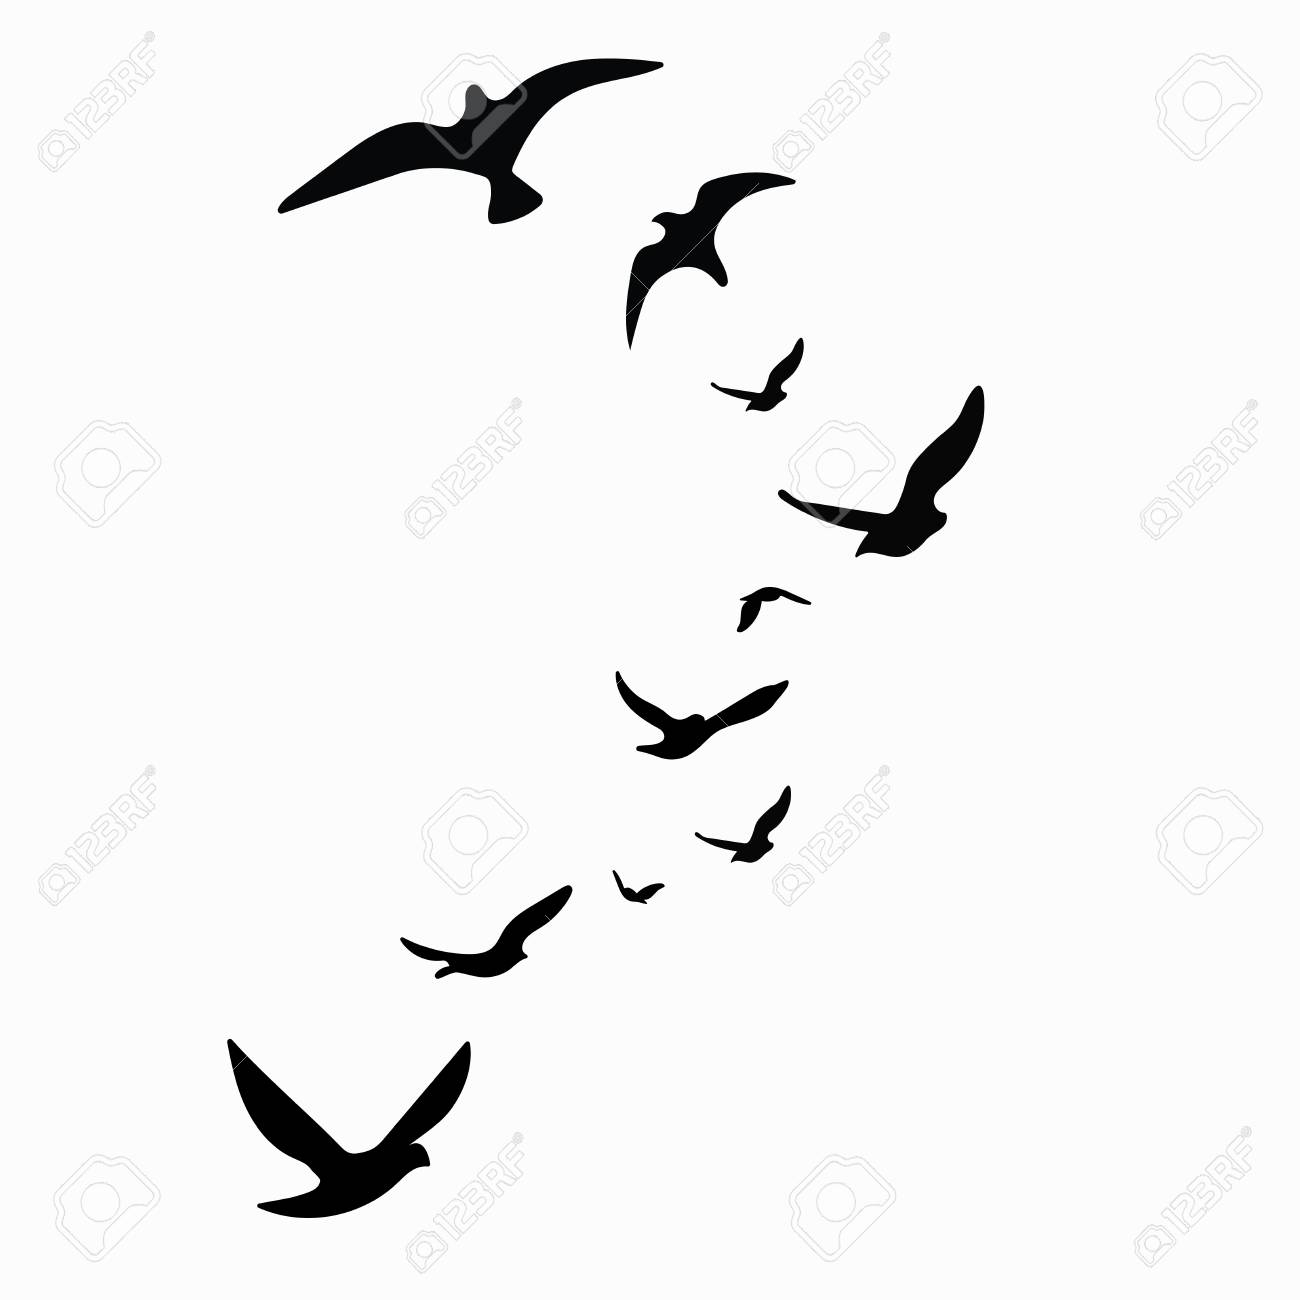 Silhouette Of A Flock Of Birds Black Contours Of Flying Birds inside sizing 1300 X 1300